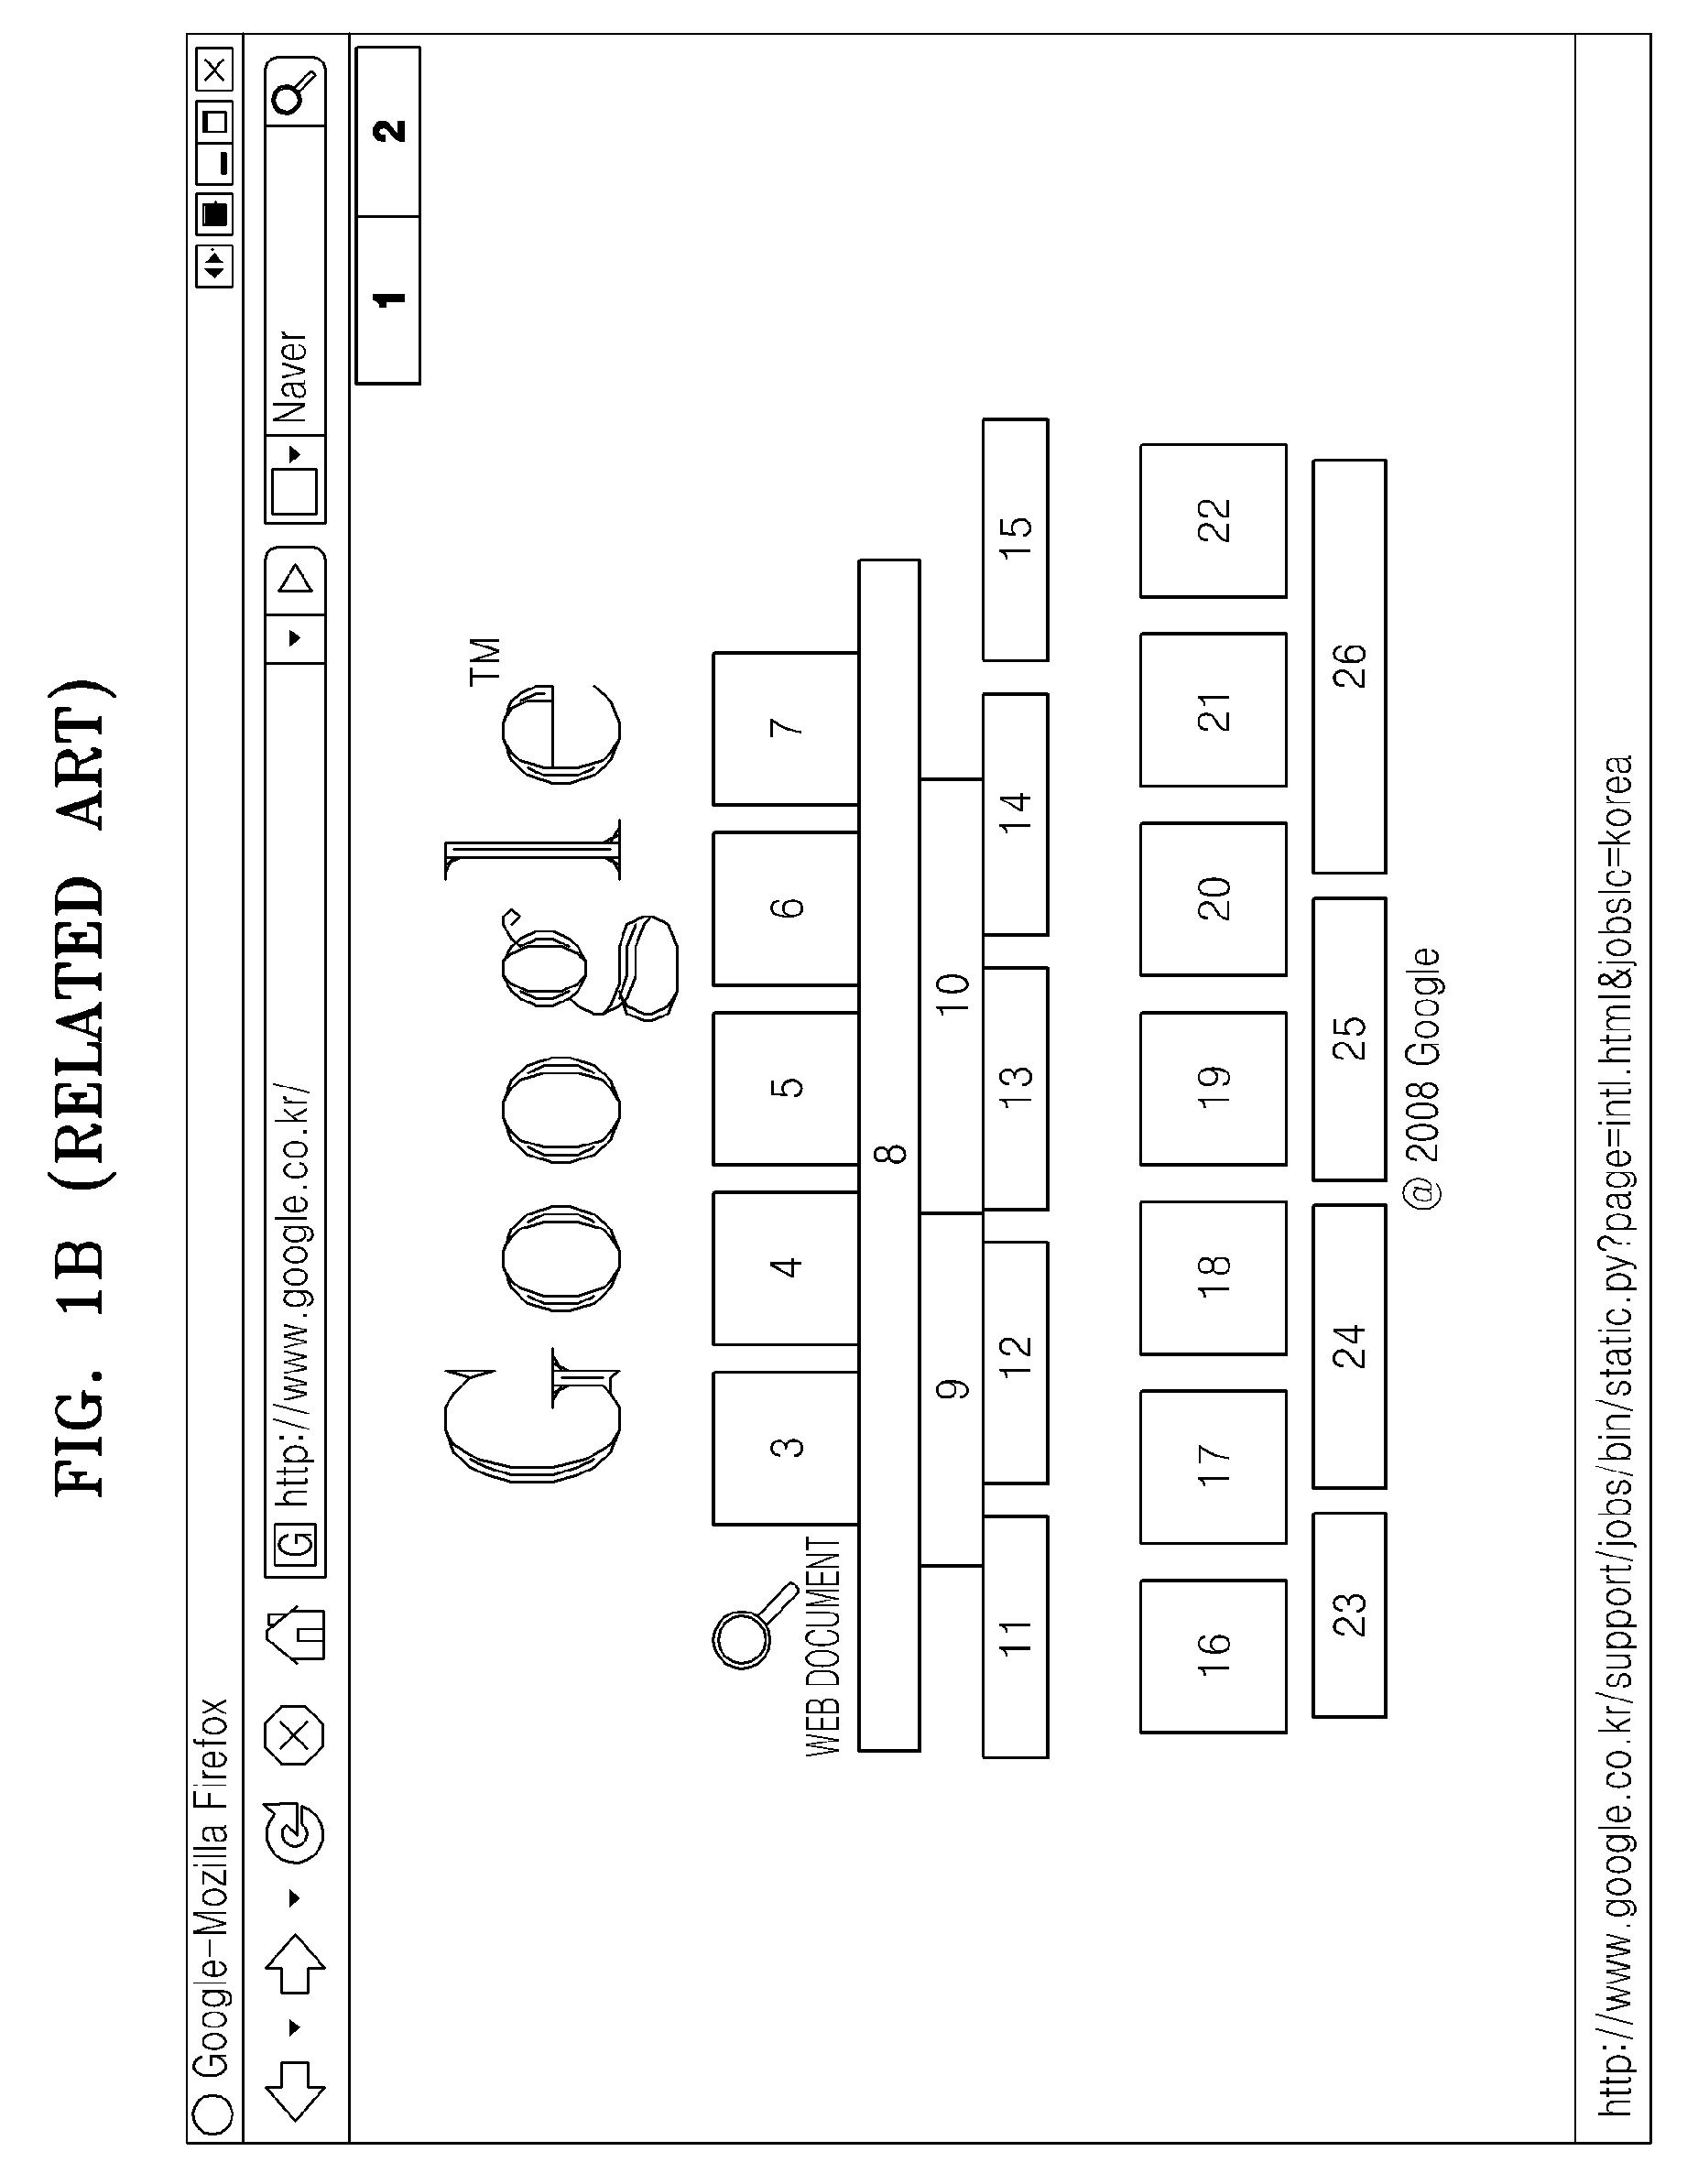 Method of defining focus movement order and moving focus, and computer readable recording medium for executing the method